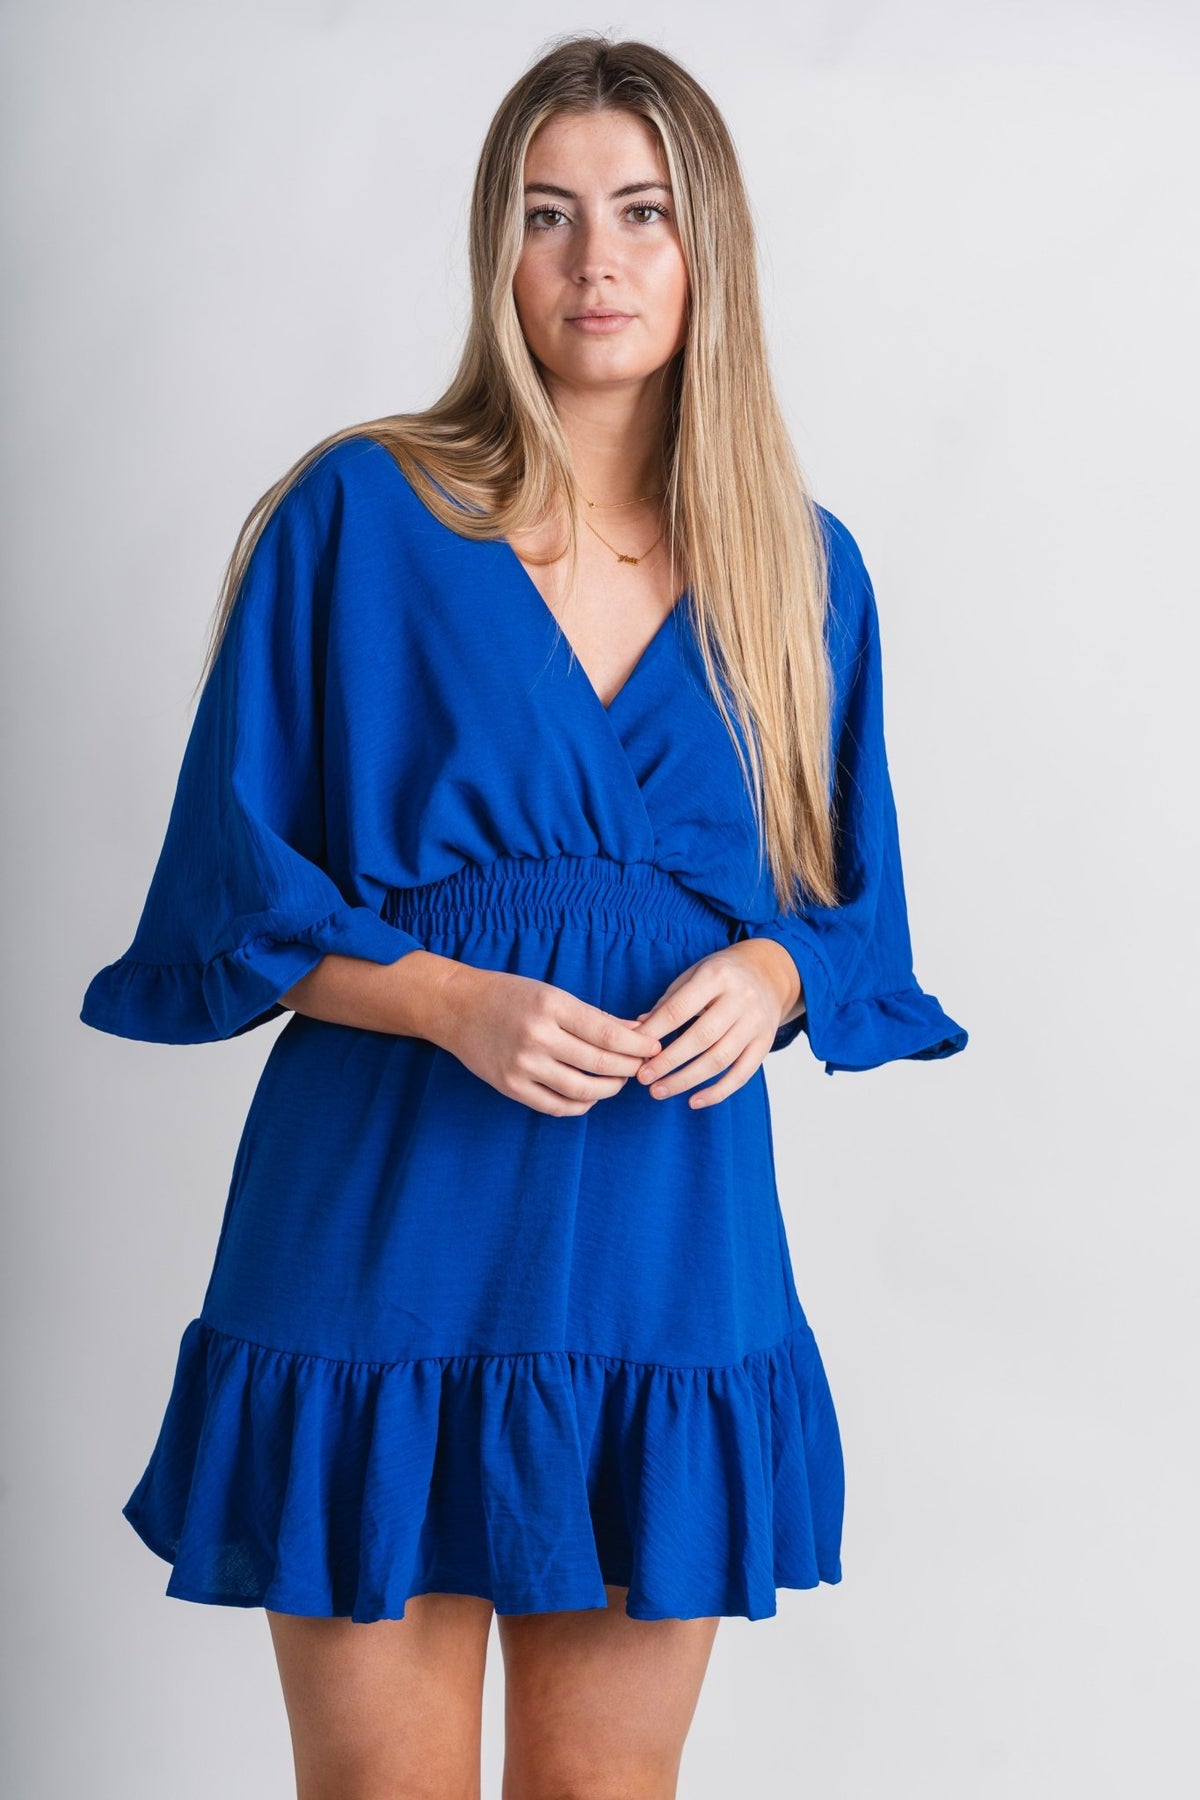 Ruffled sleeve double v dress royal blue - Trendy dress - Cute Vacation Collection at Lush Fashion Lounge Boutique in Oklahoma City